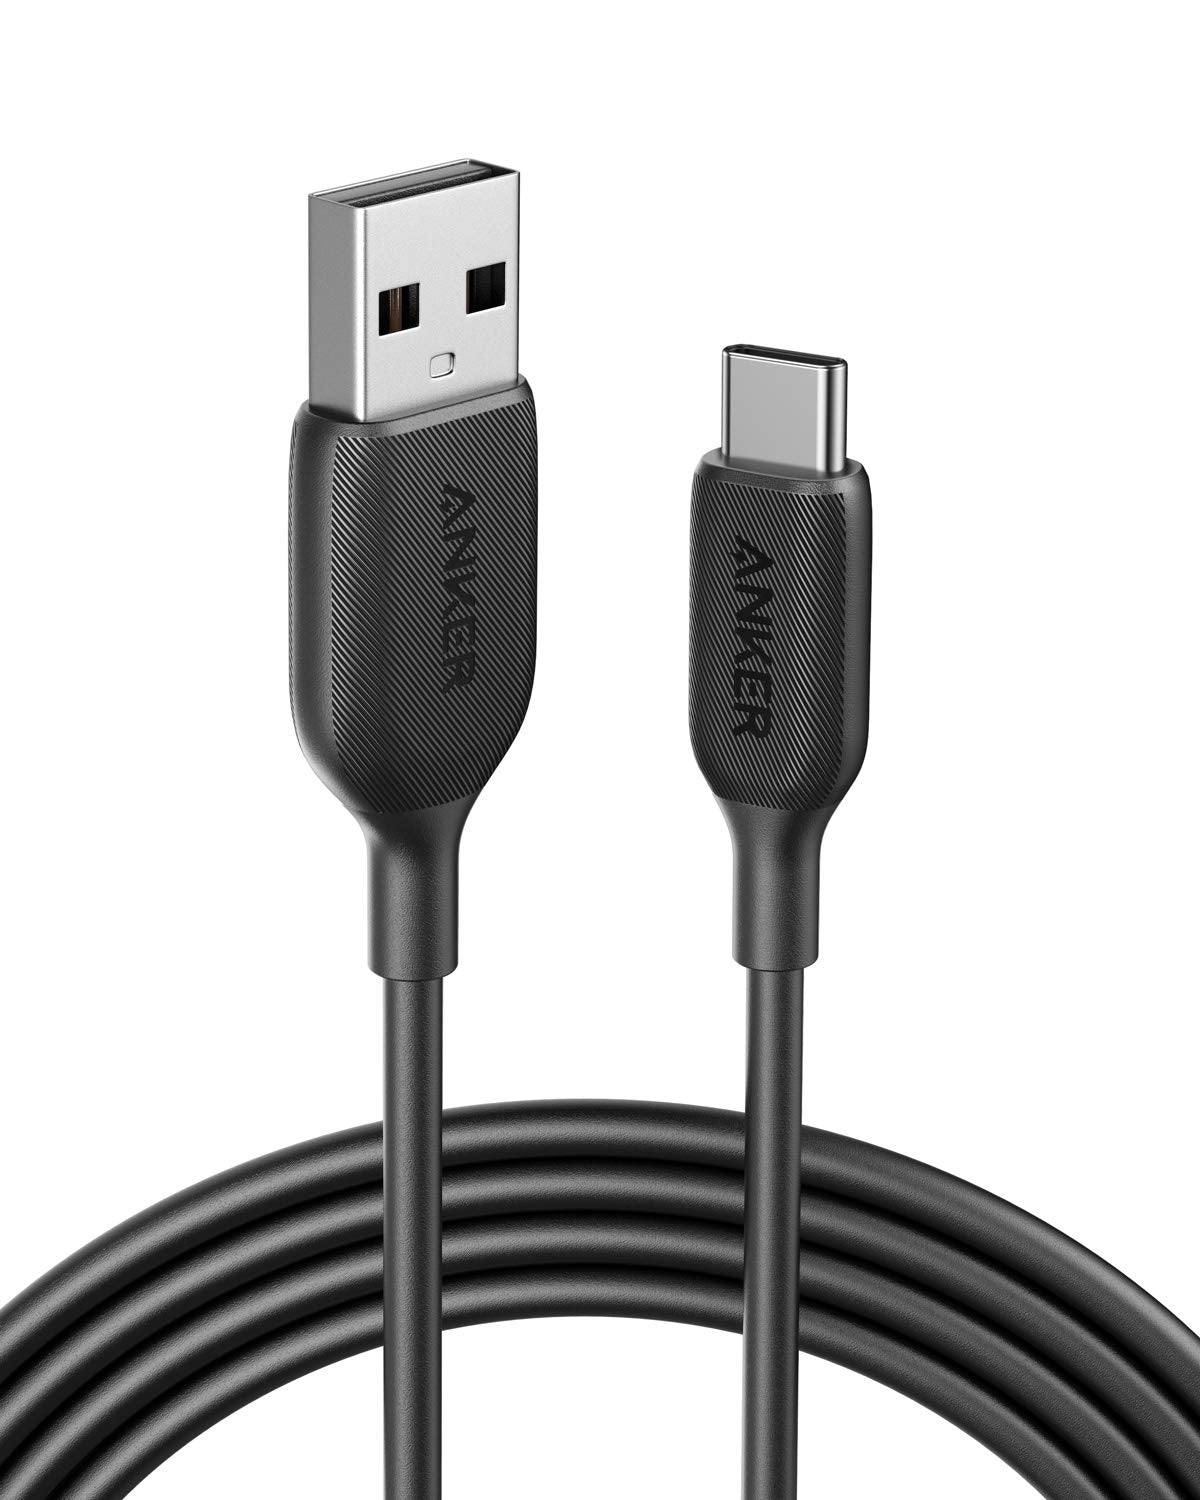 PowerLine III USB-A to USB-C Cable(10ft)